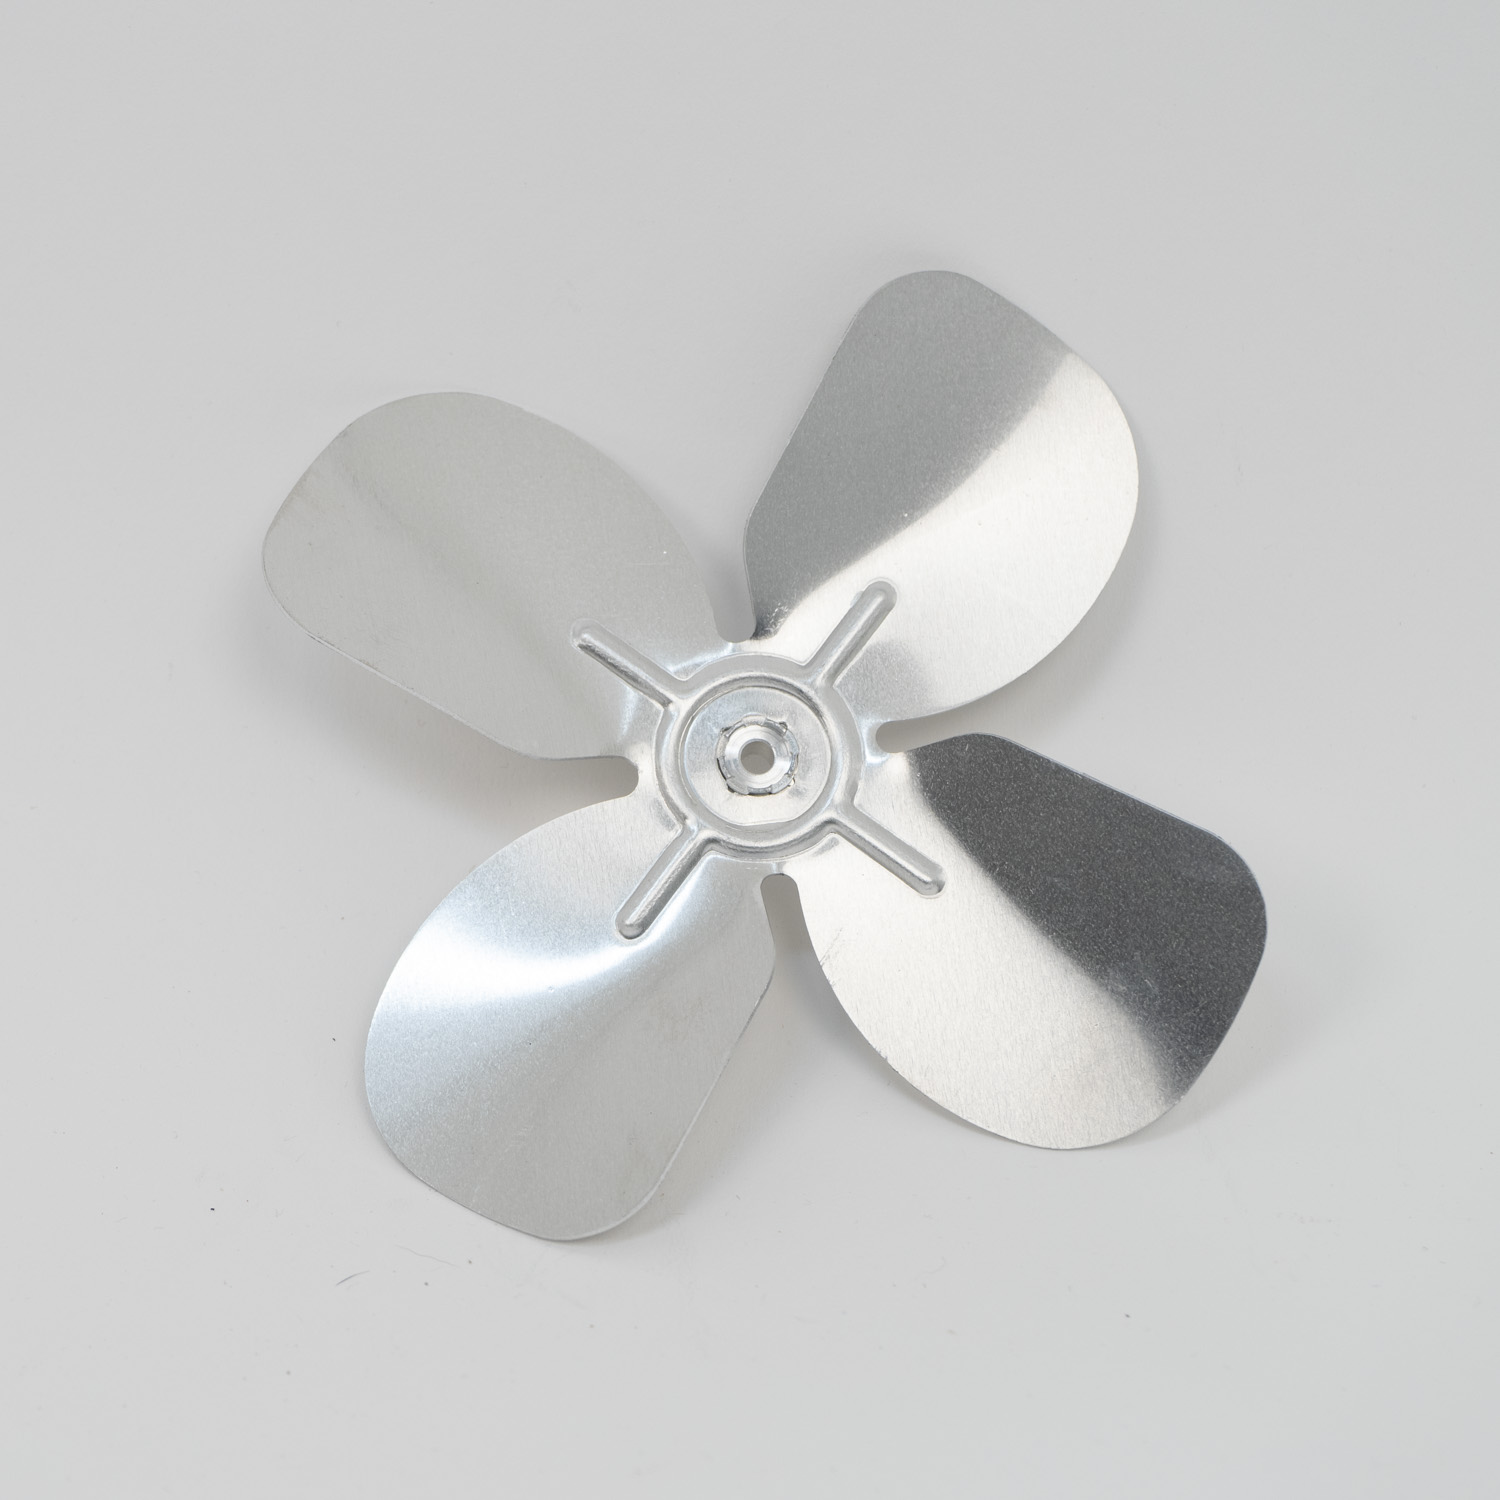 Four Wing Free Air Fan Blade Interchangeable Hub CCW 20 Dia 23 Pitch Aluminum Blade 